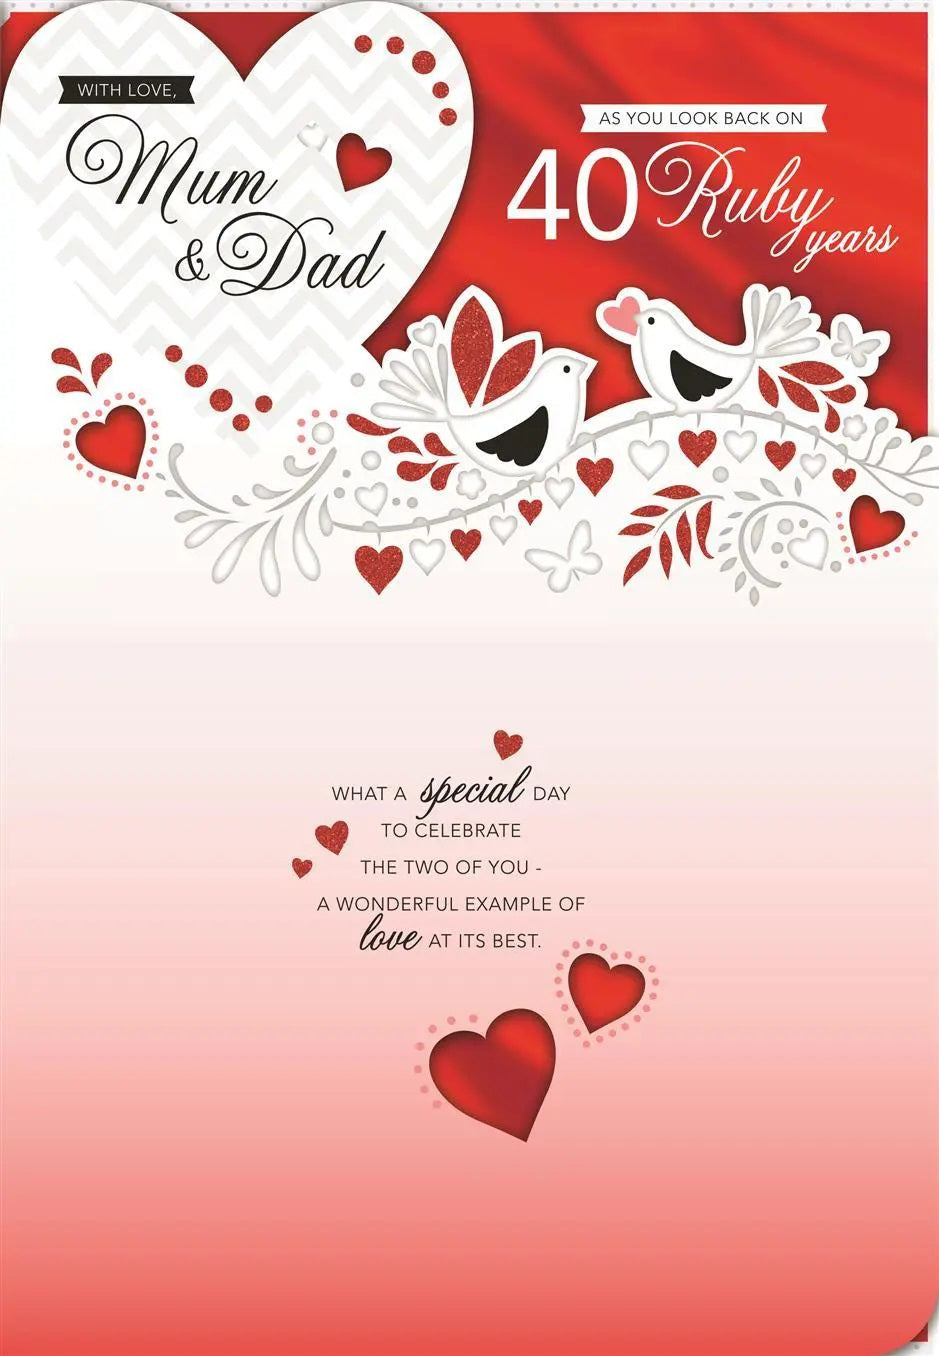 Mum and Dad 40th Wedding Anniversary Card  - Love Birds on a Branch 